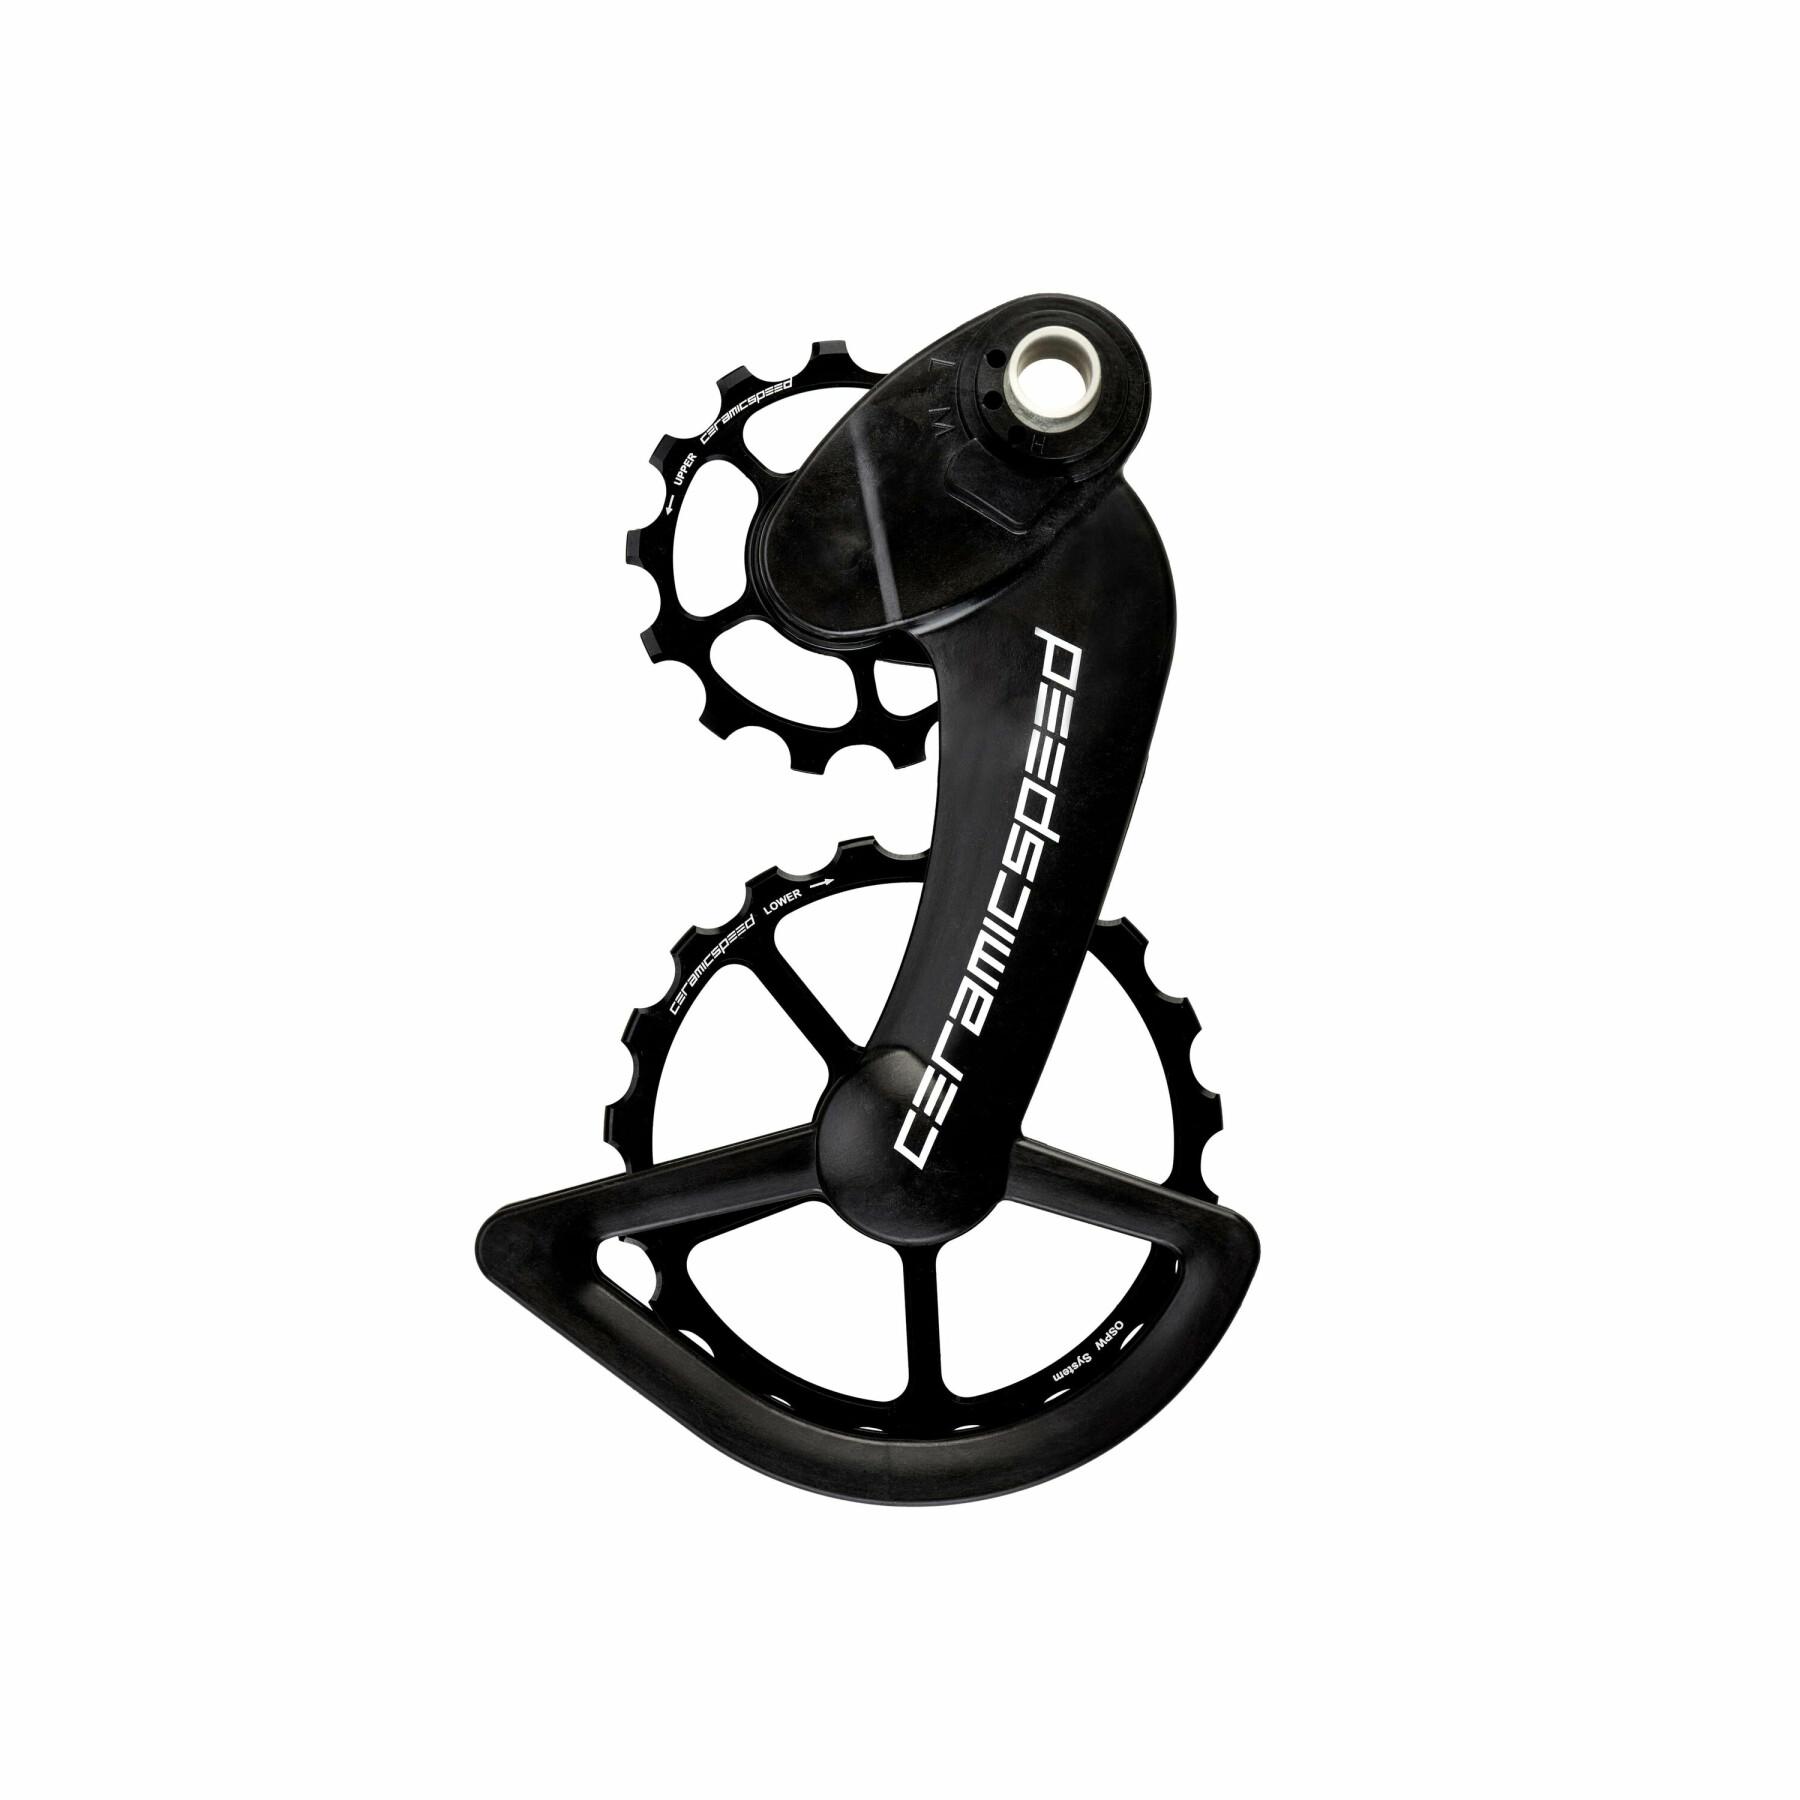 Stół CeramicSpeed OSPW Campagnolo 12v eps black alloy 607 stainless steel